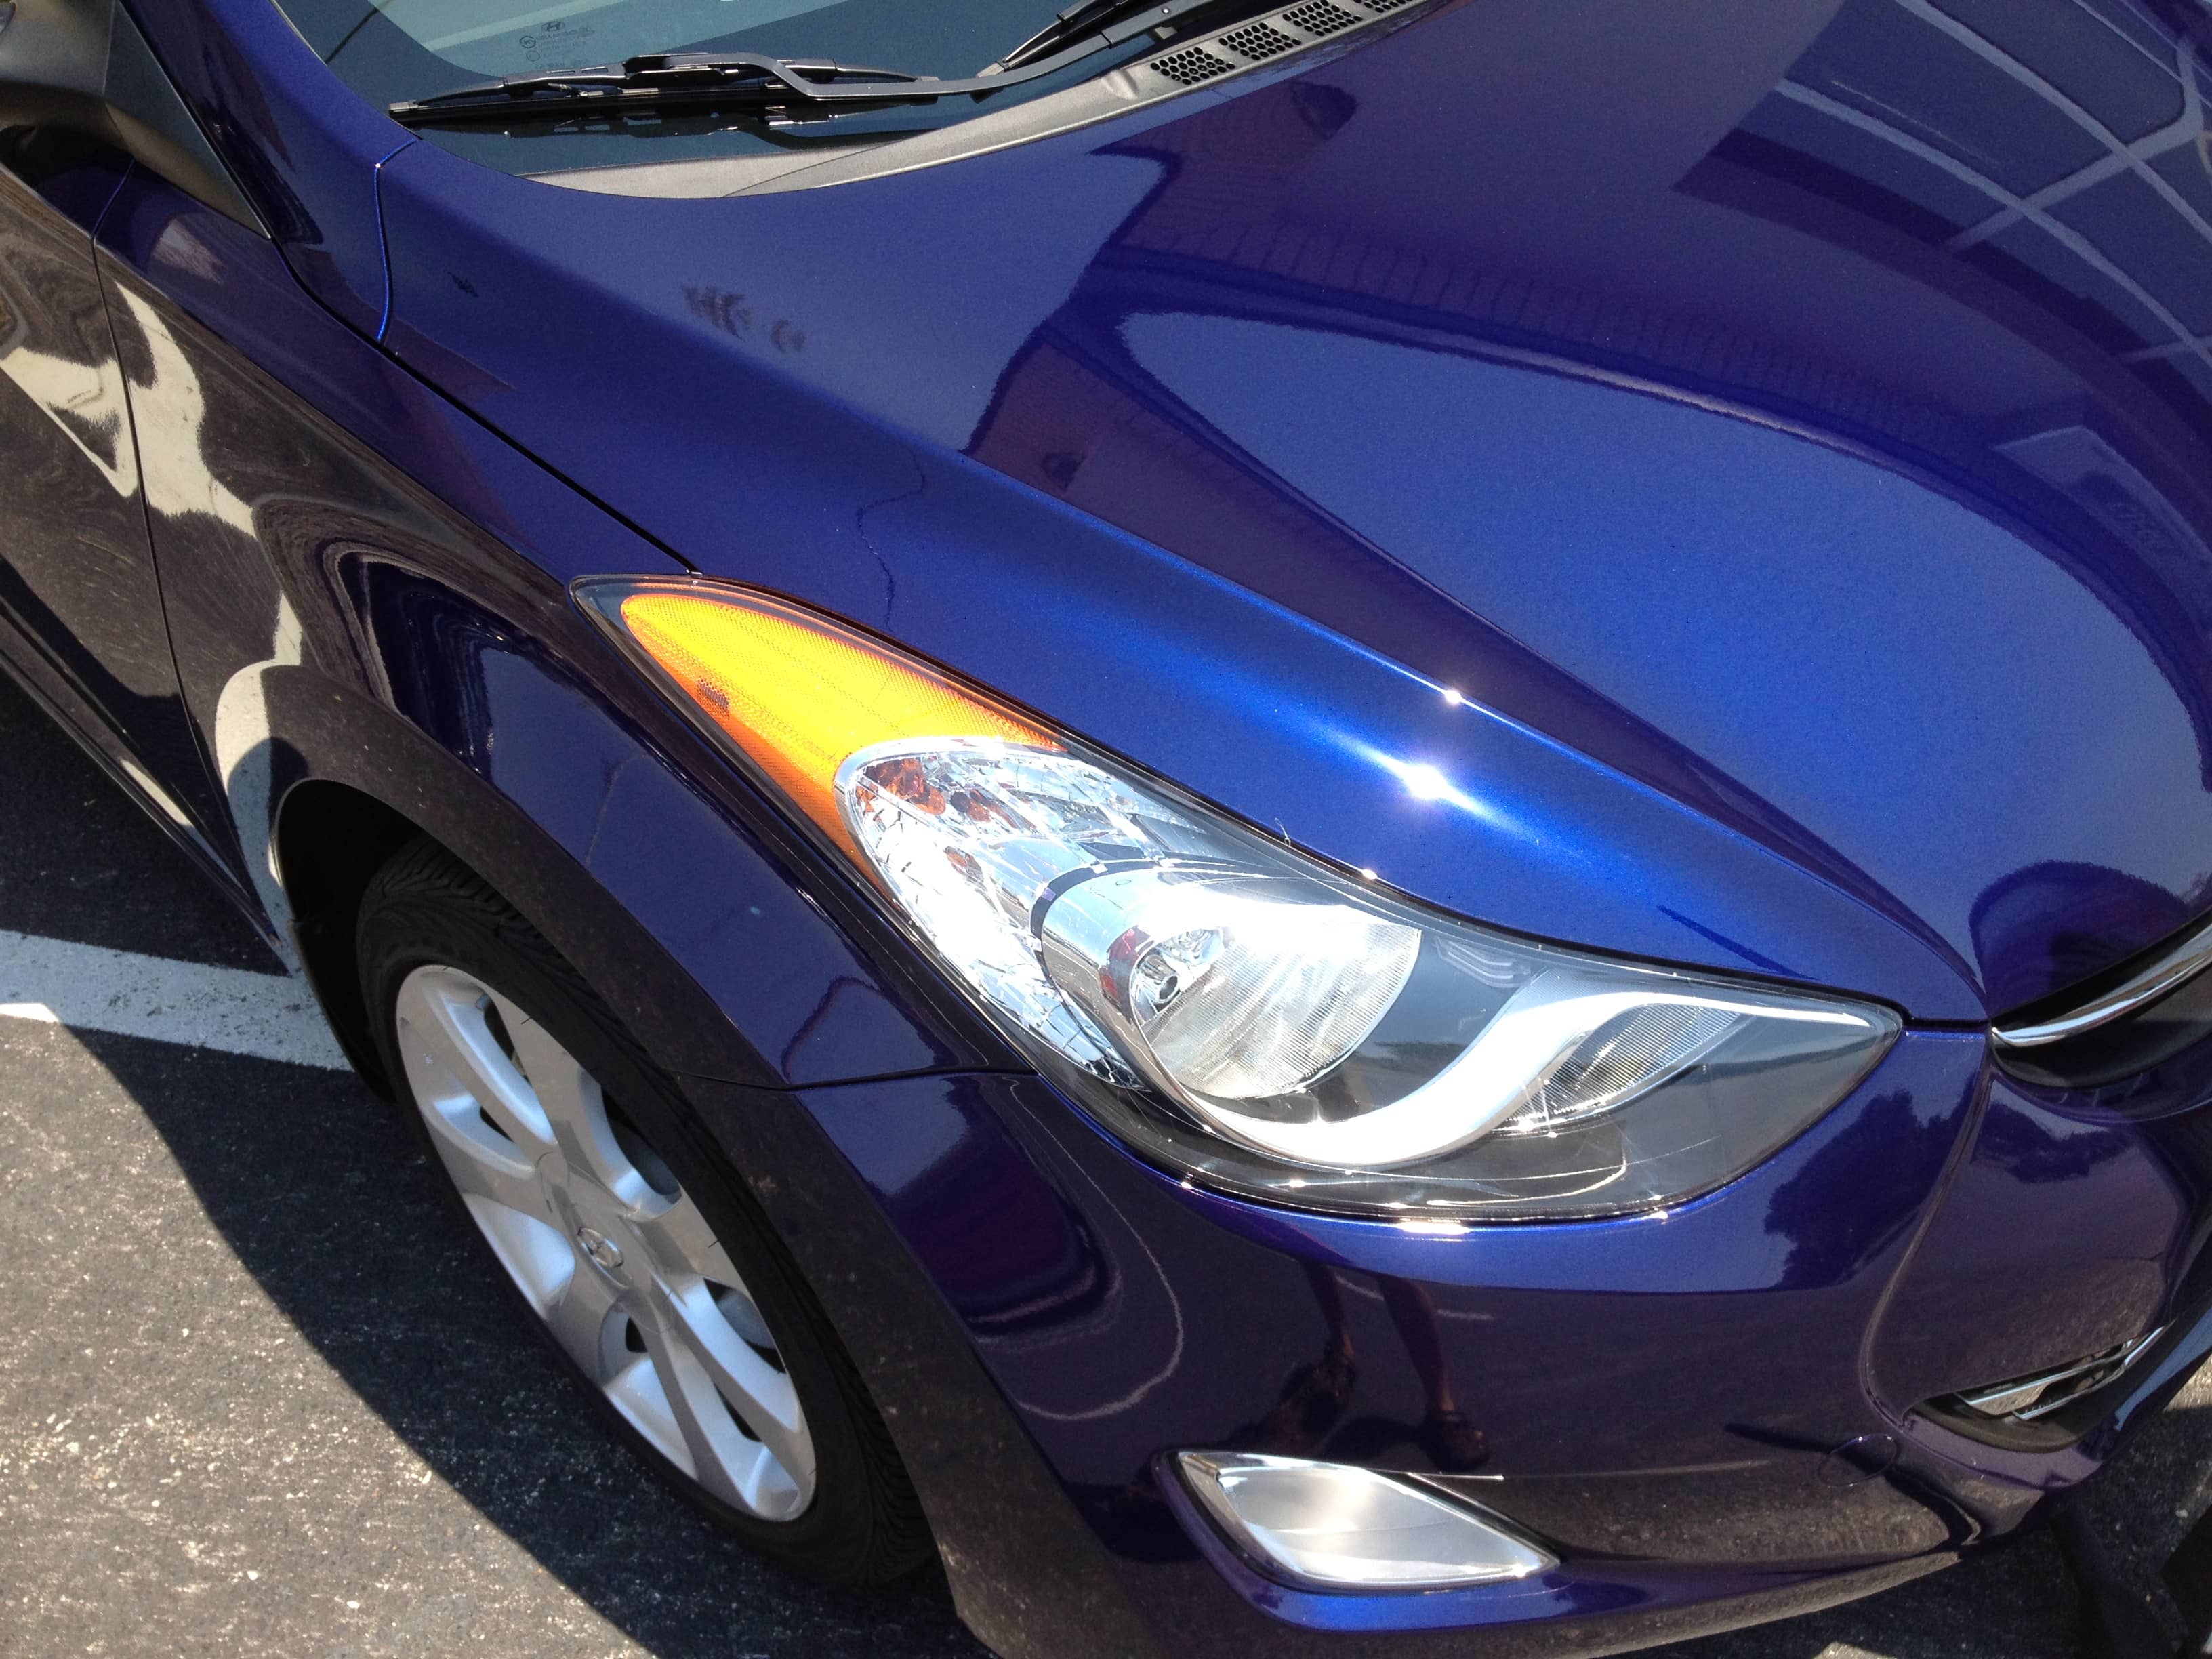 2011 Hyundai Elantra 3M front invisible bra paint film for full hood, bumper and fenders